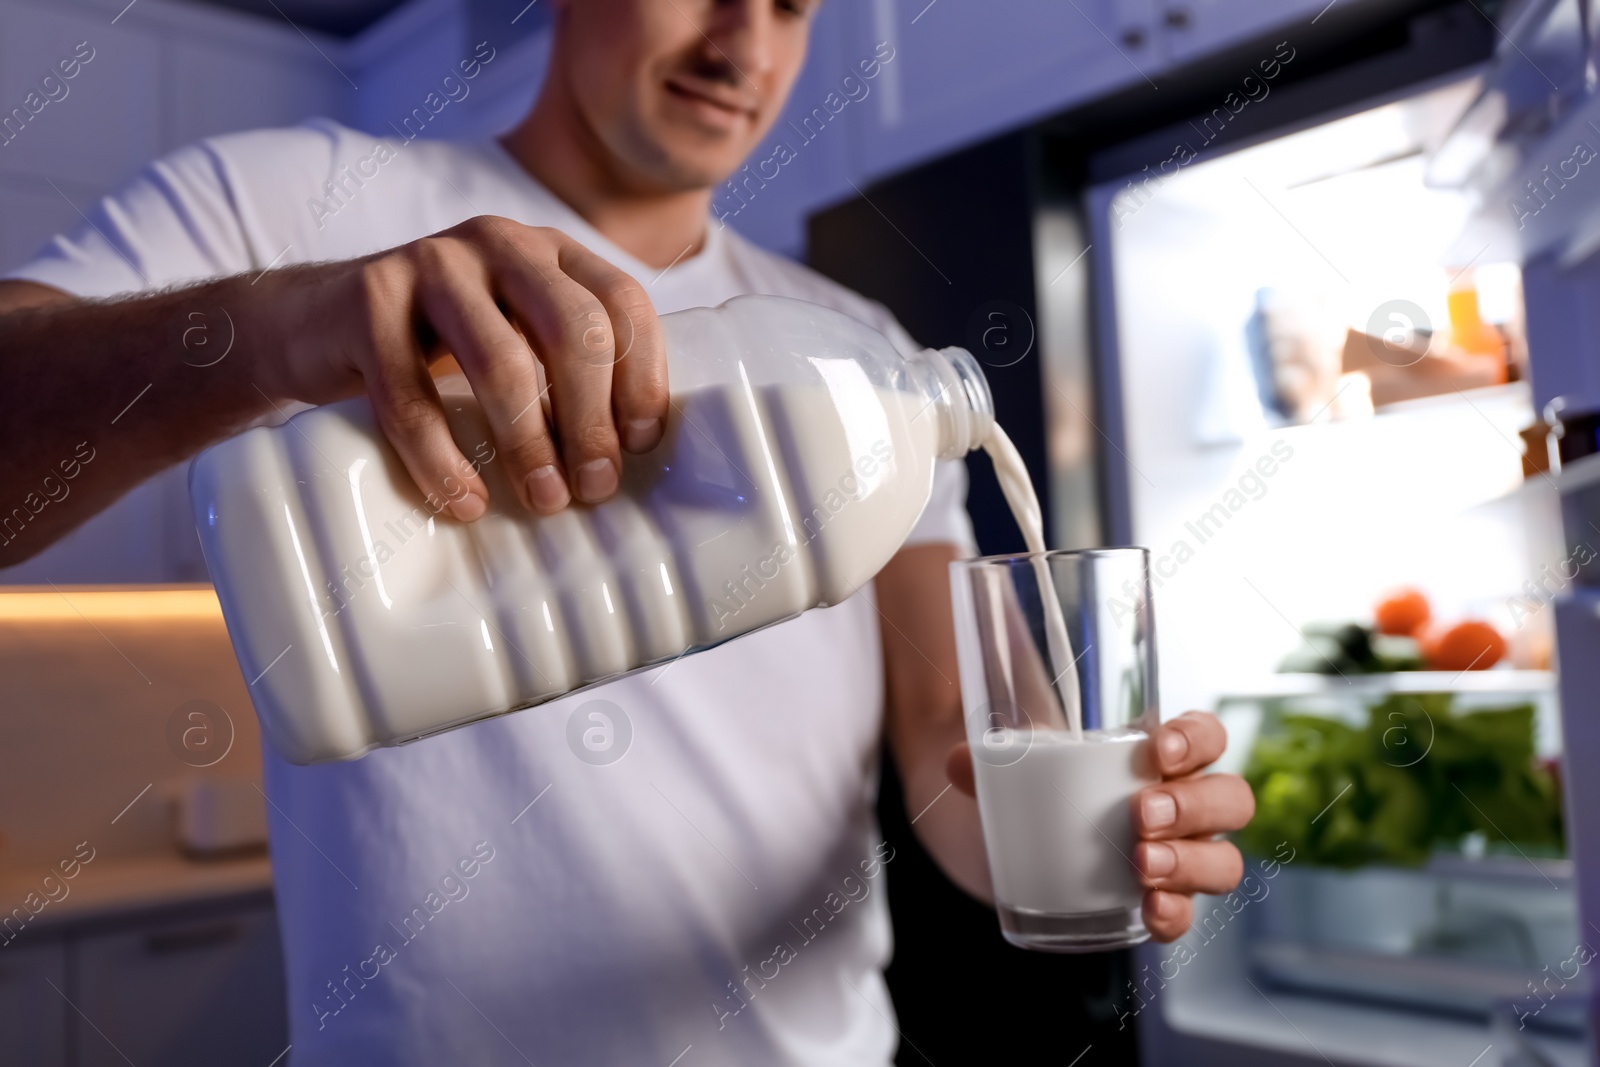 Photo of Man pouring milk from gallon bottle into glass near refrigerator in kitchen at night, closeup